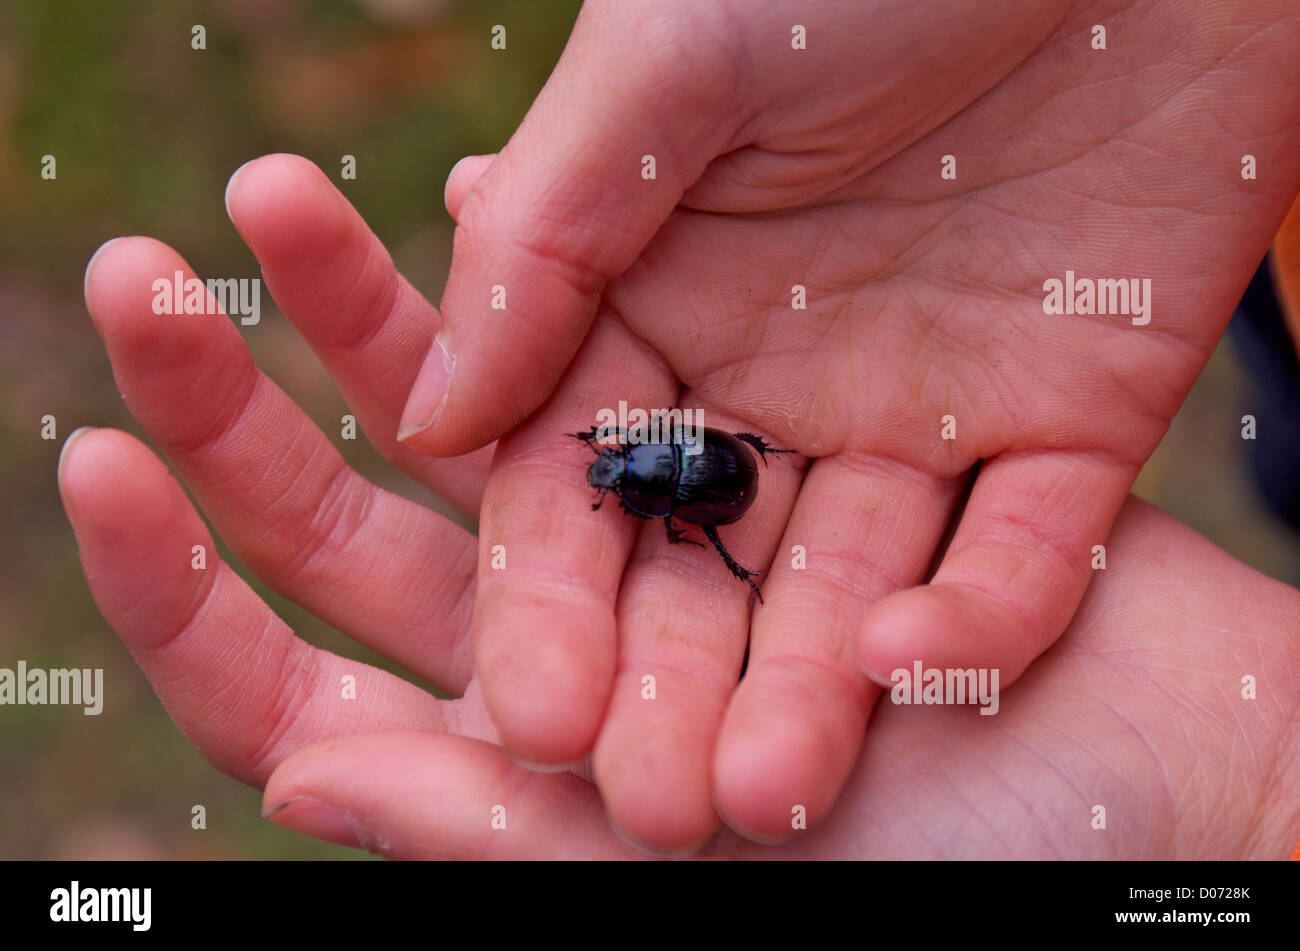 10 year old boy holding a dung beetle. Stock Photo